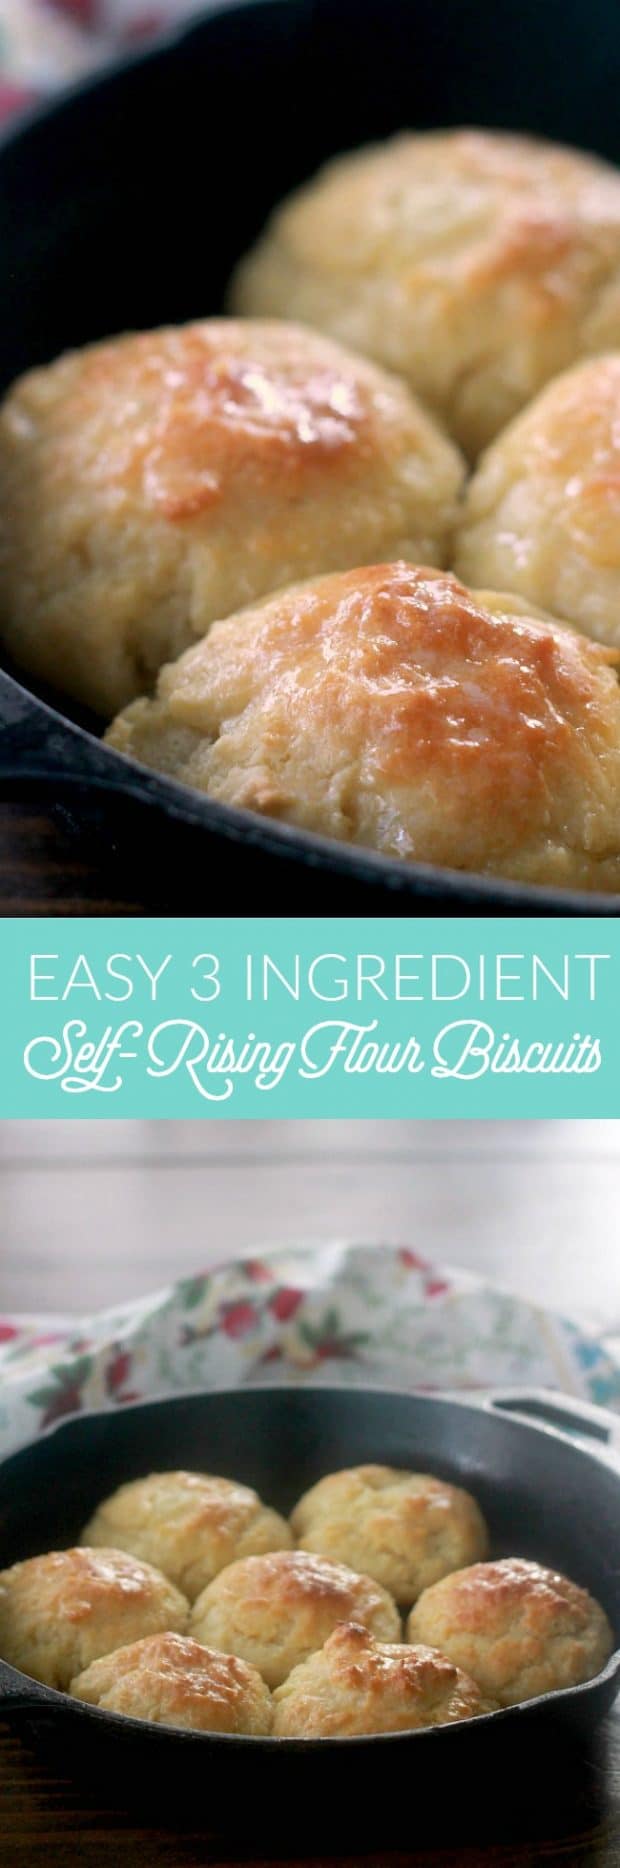 Self-Rising Flour Biscuits are the easiest biscuits you will ever make! The dough for these drop biscuits comes together in less than 10 minutes and uses only 3 ingredients: self-rising flour, salted butter, and milk or buttermilk!